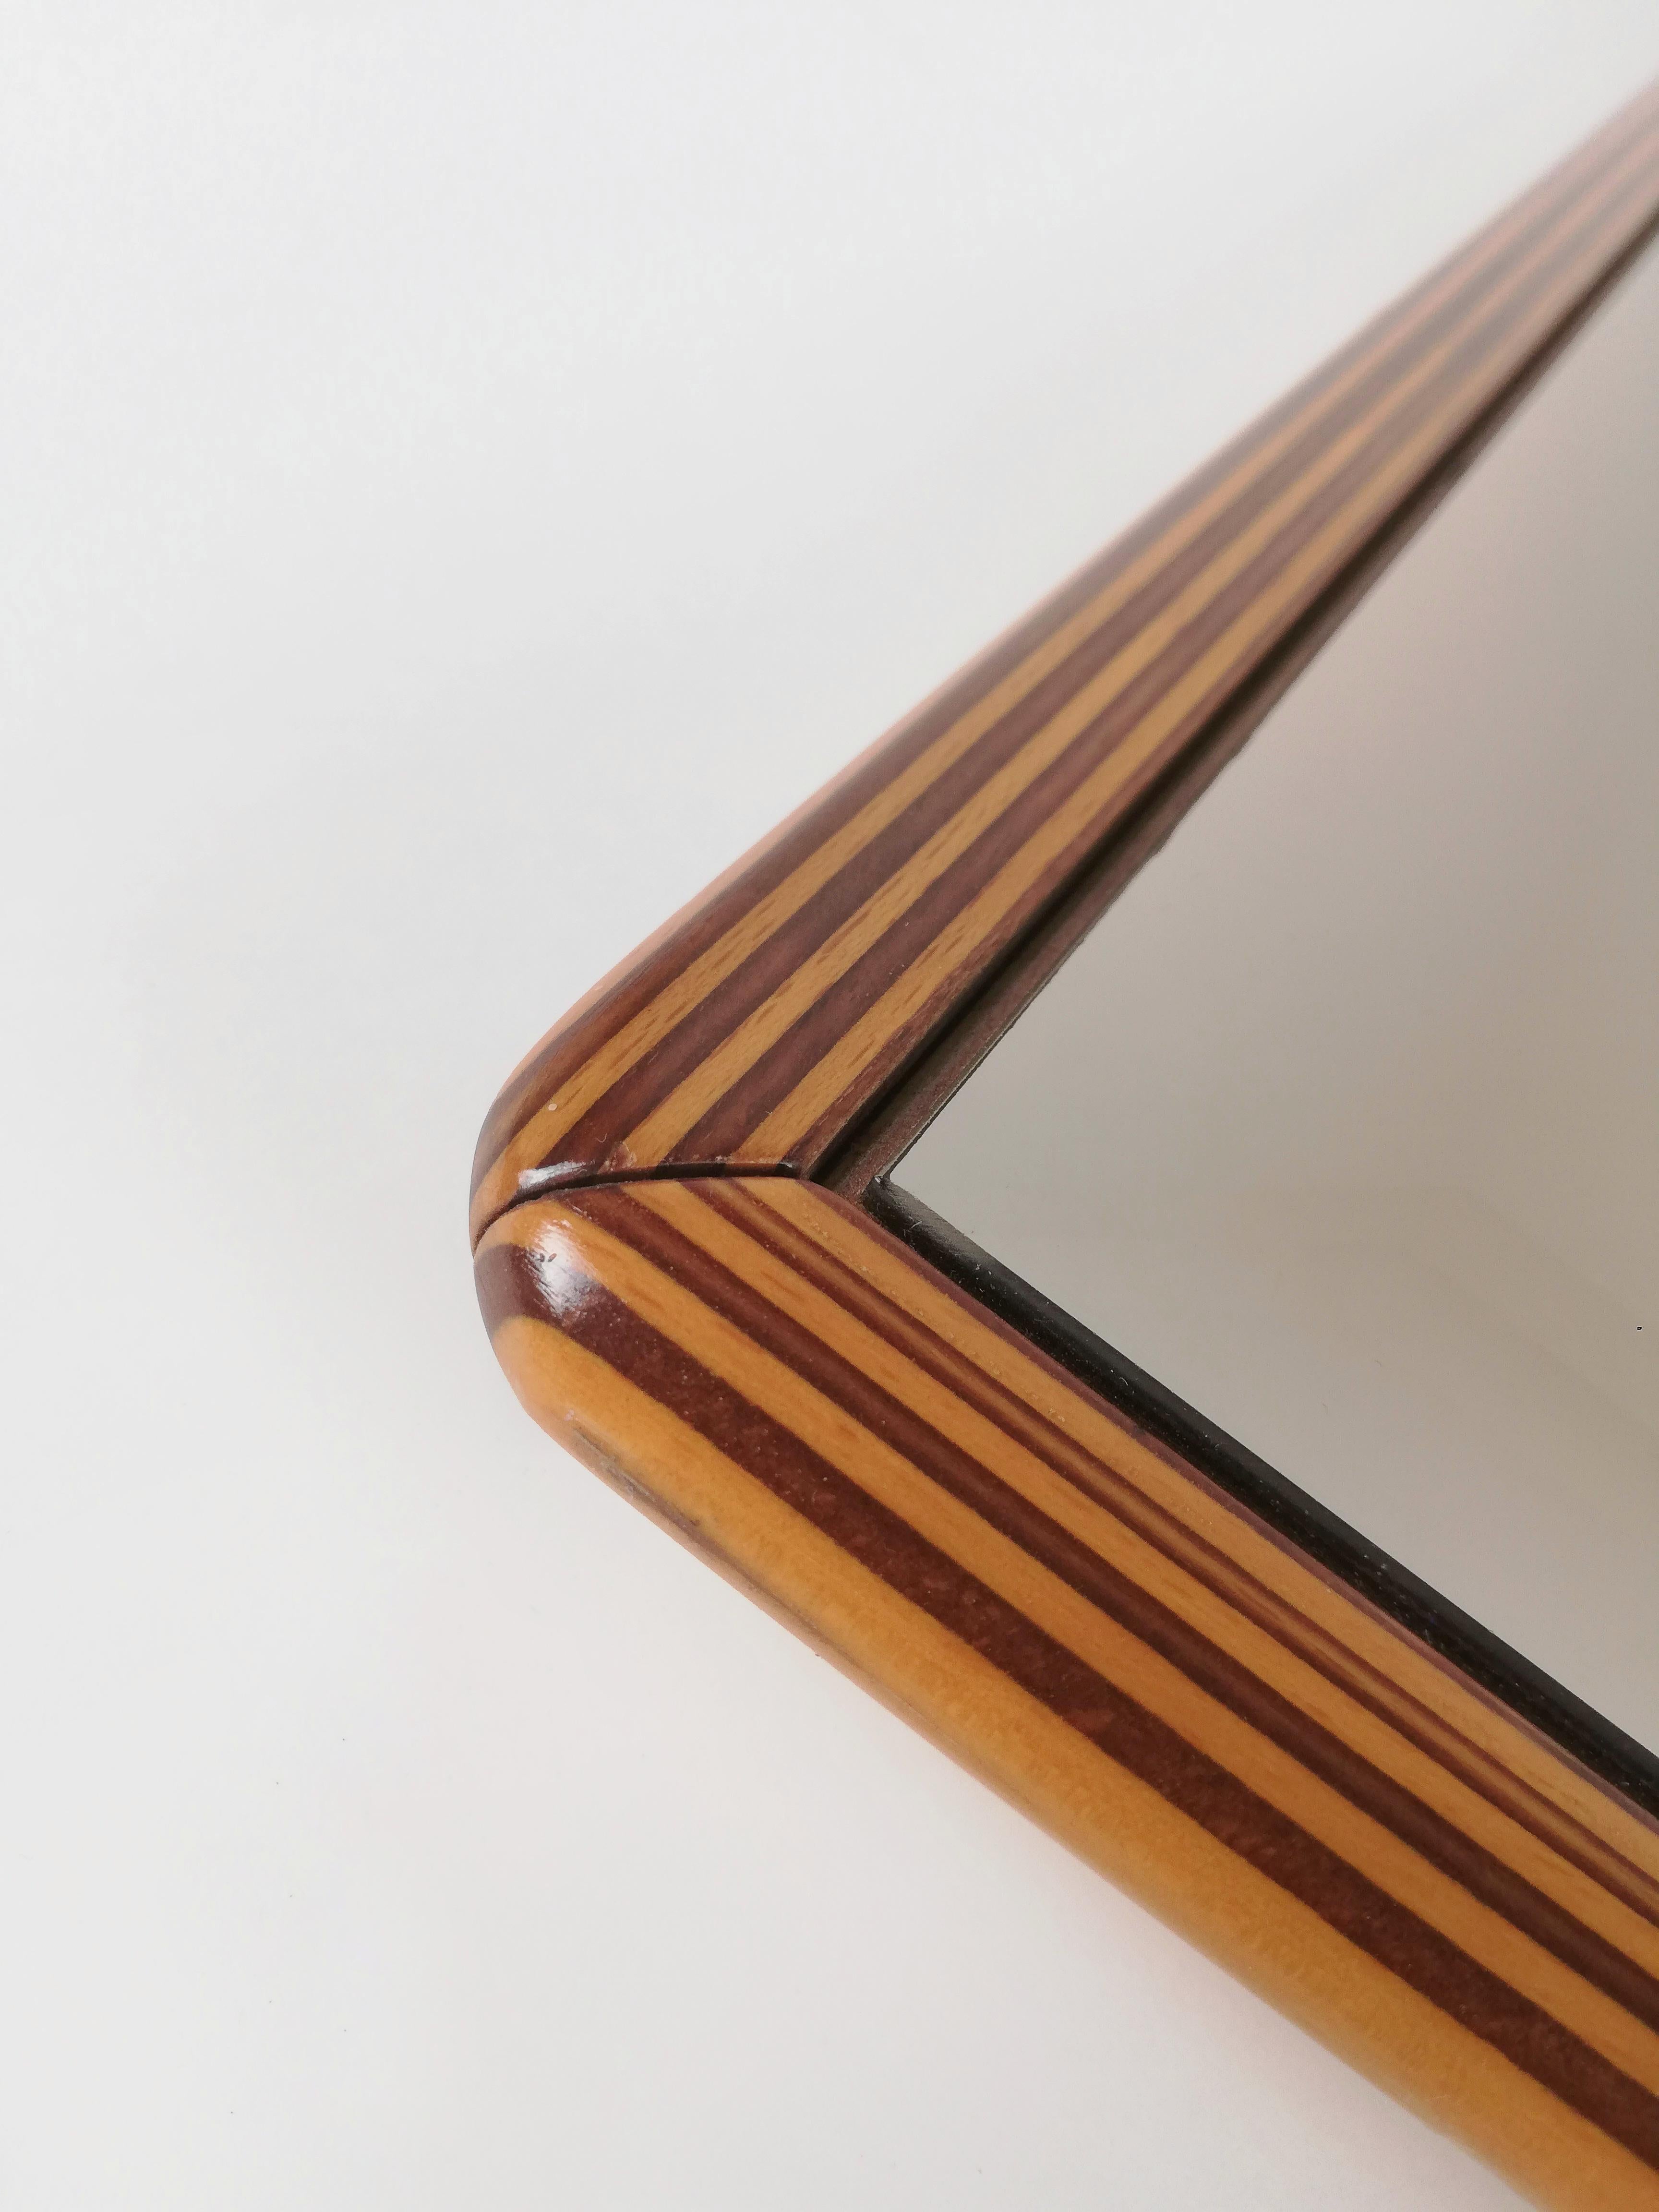 A mirror of high quality and precious workmanship.
It was made in Italy in the late 70s.
The two-tone solid walnut wood frame recalls the Artona collection produced by max Alto and designed by Afra and Tobia Scarpa.
The mirror is smoked and has a